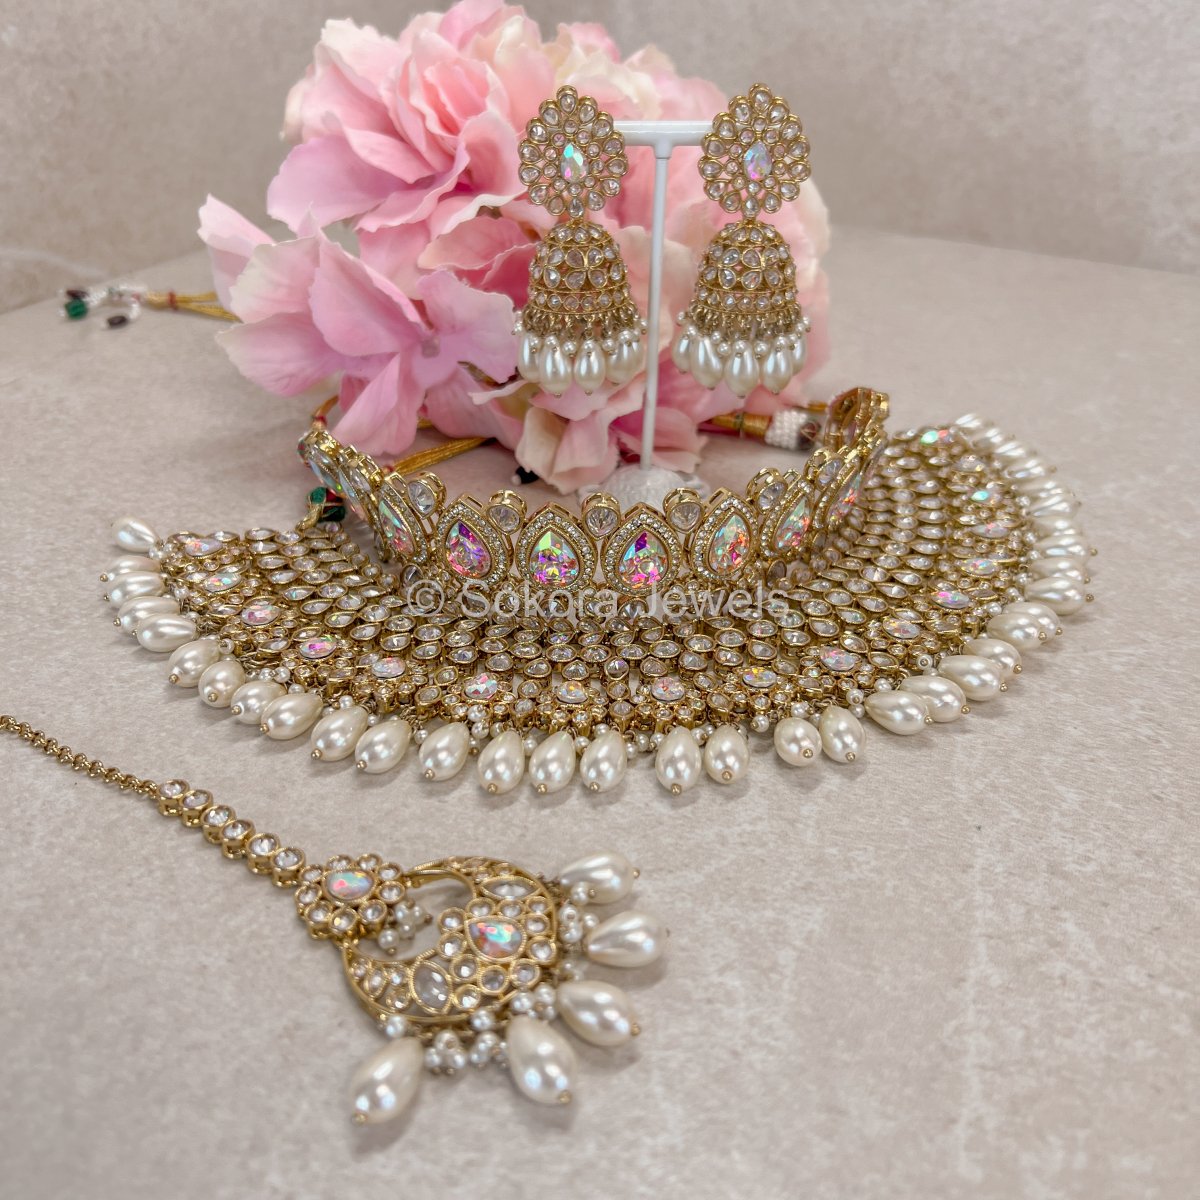 Lucie Bridal Double Necklace & Earring Set - Iridescent Shimmer - SOKORA JEWELSLucie Bridal Double Necklace & Earring Set - Iridescent Shimmer